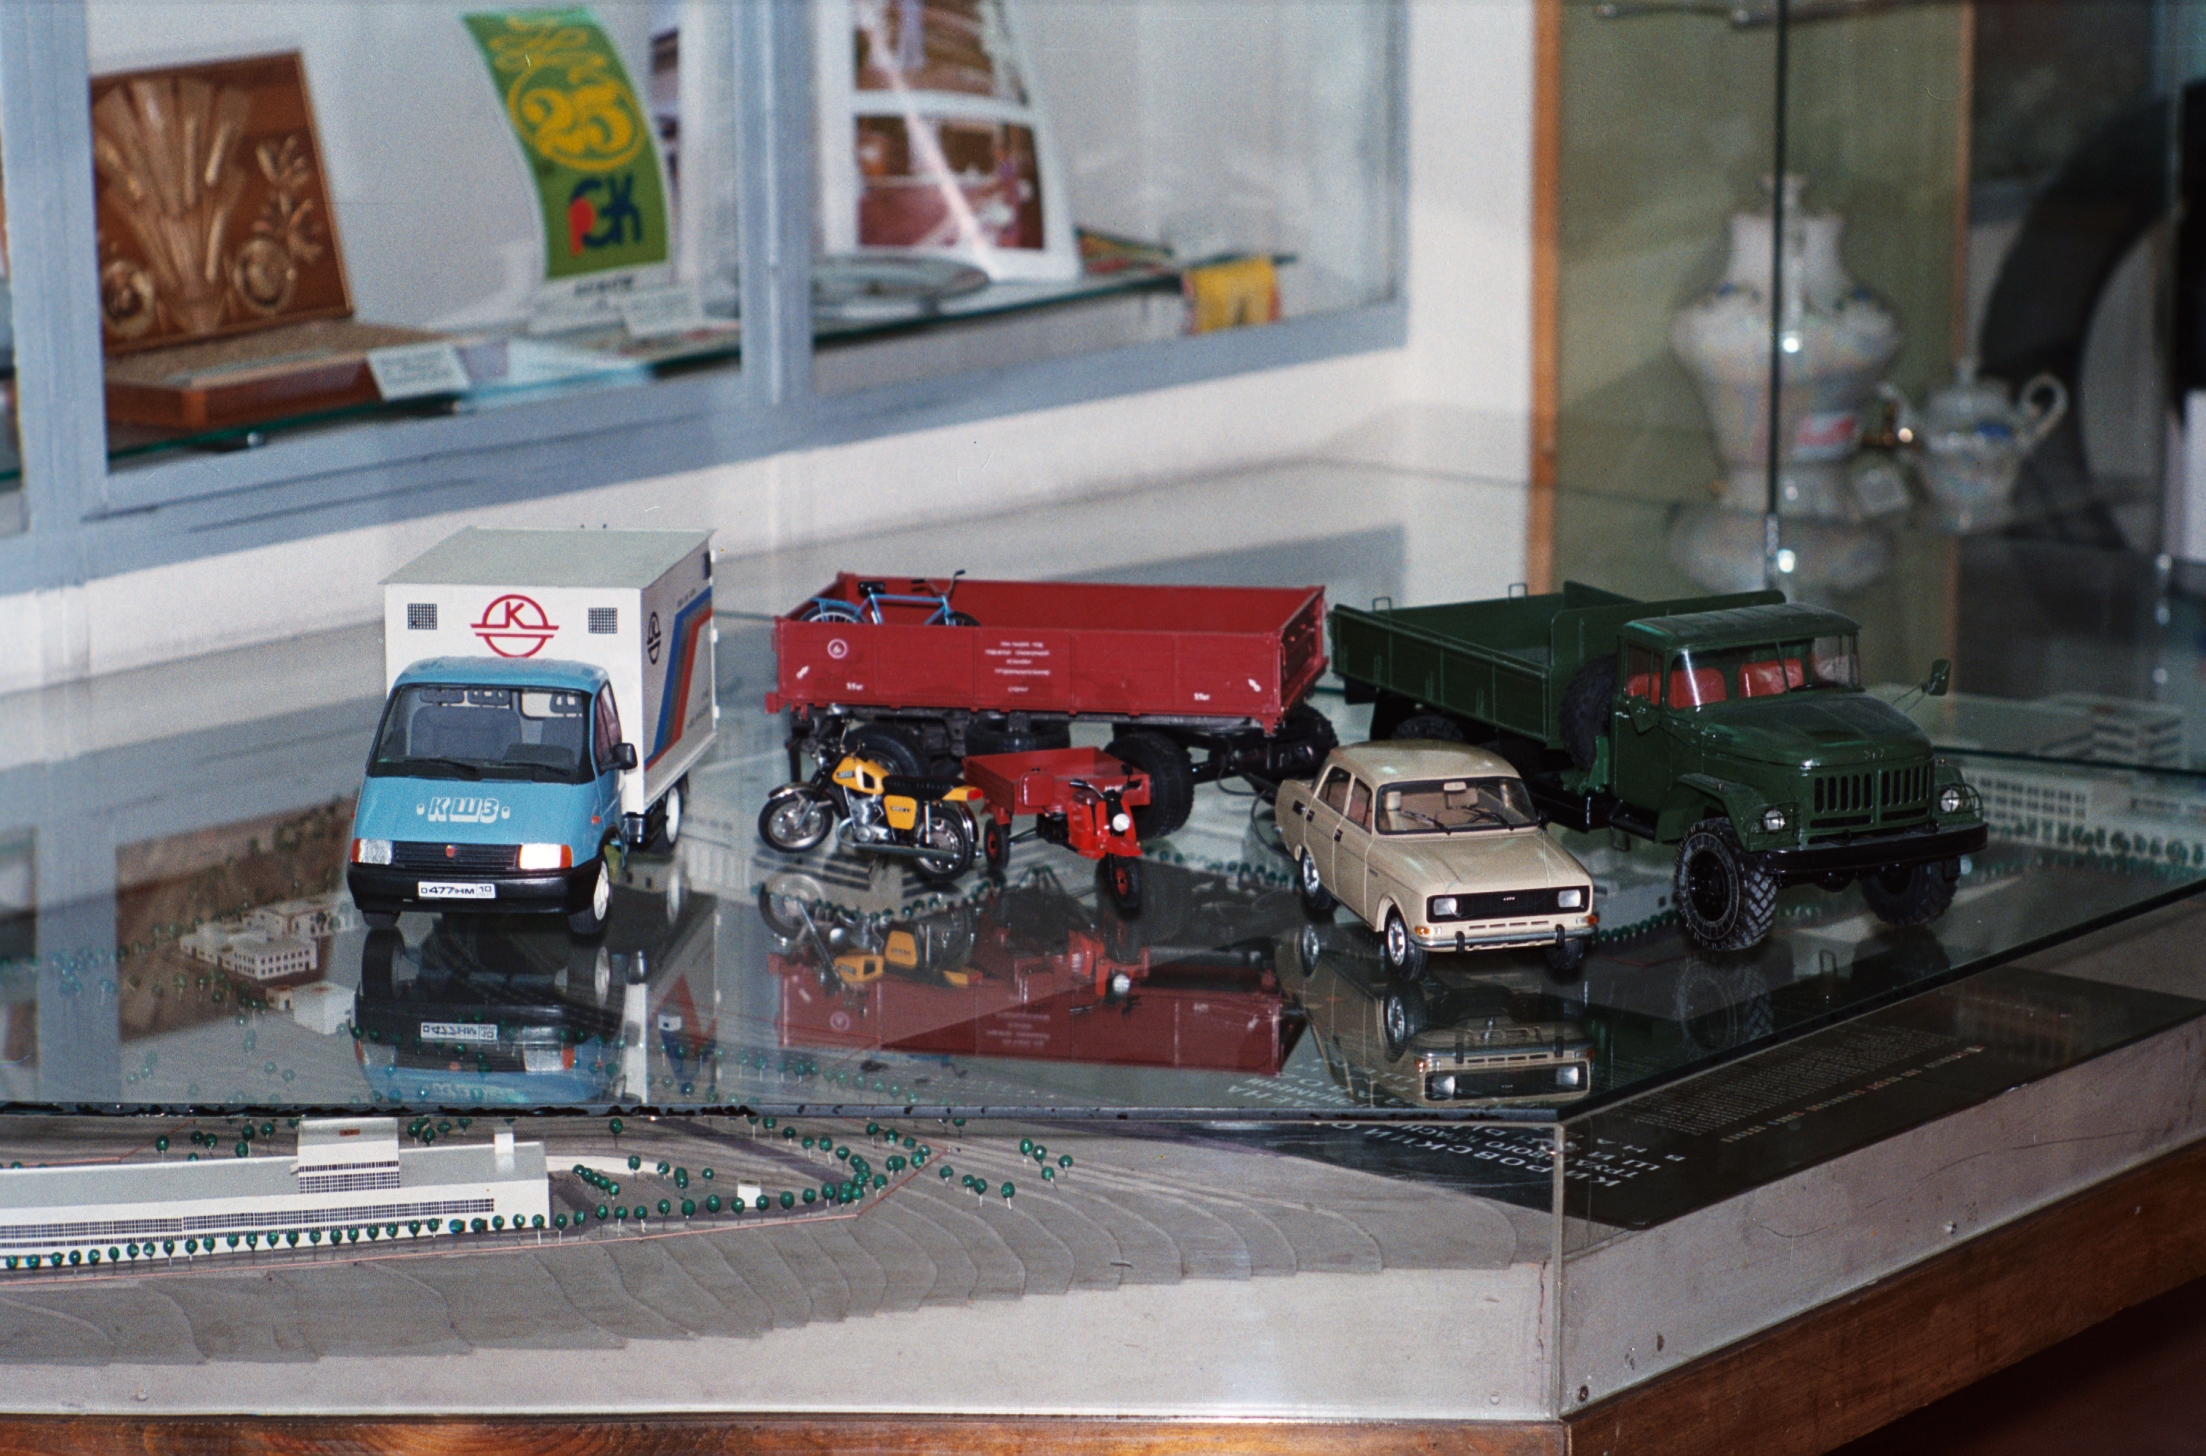 A range of models of automotive equipment to demonstrate manufactured products